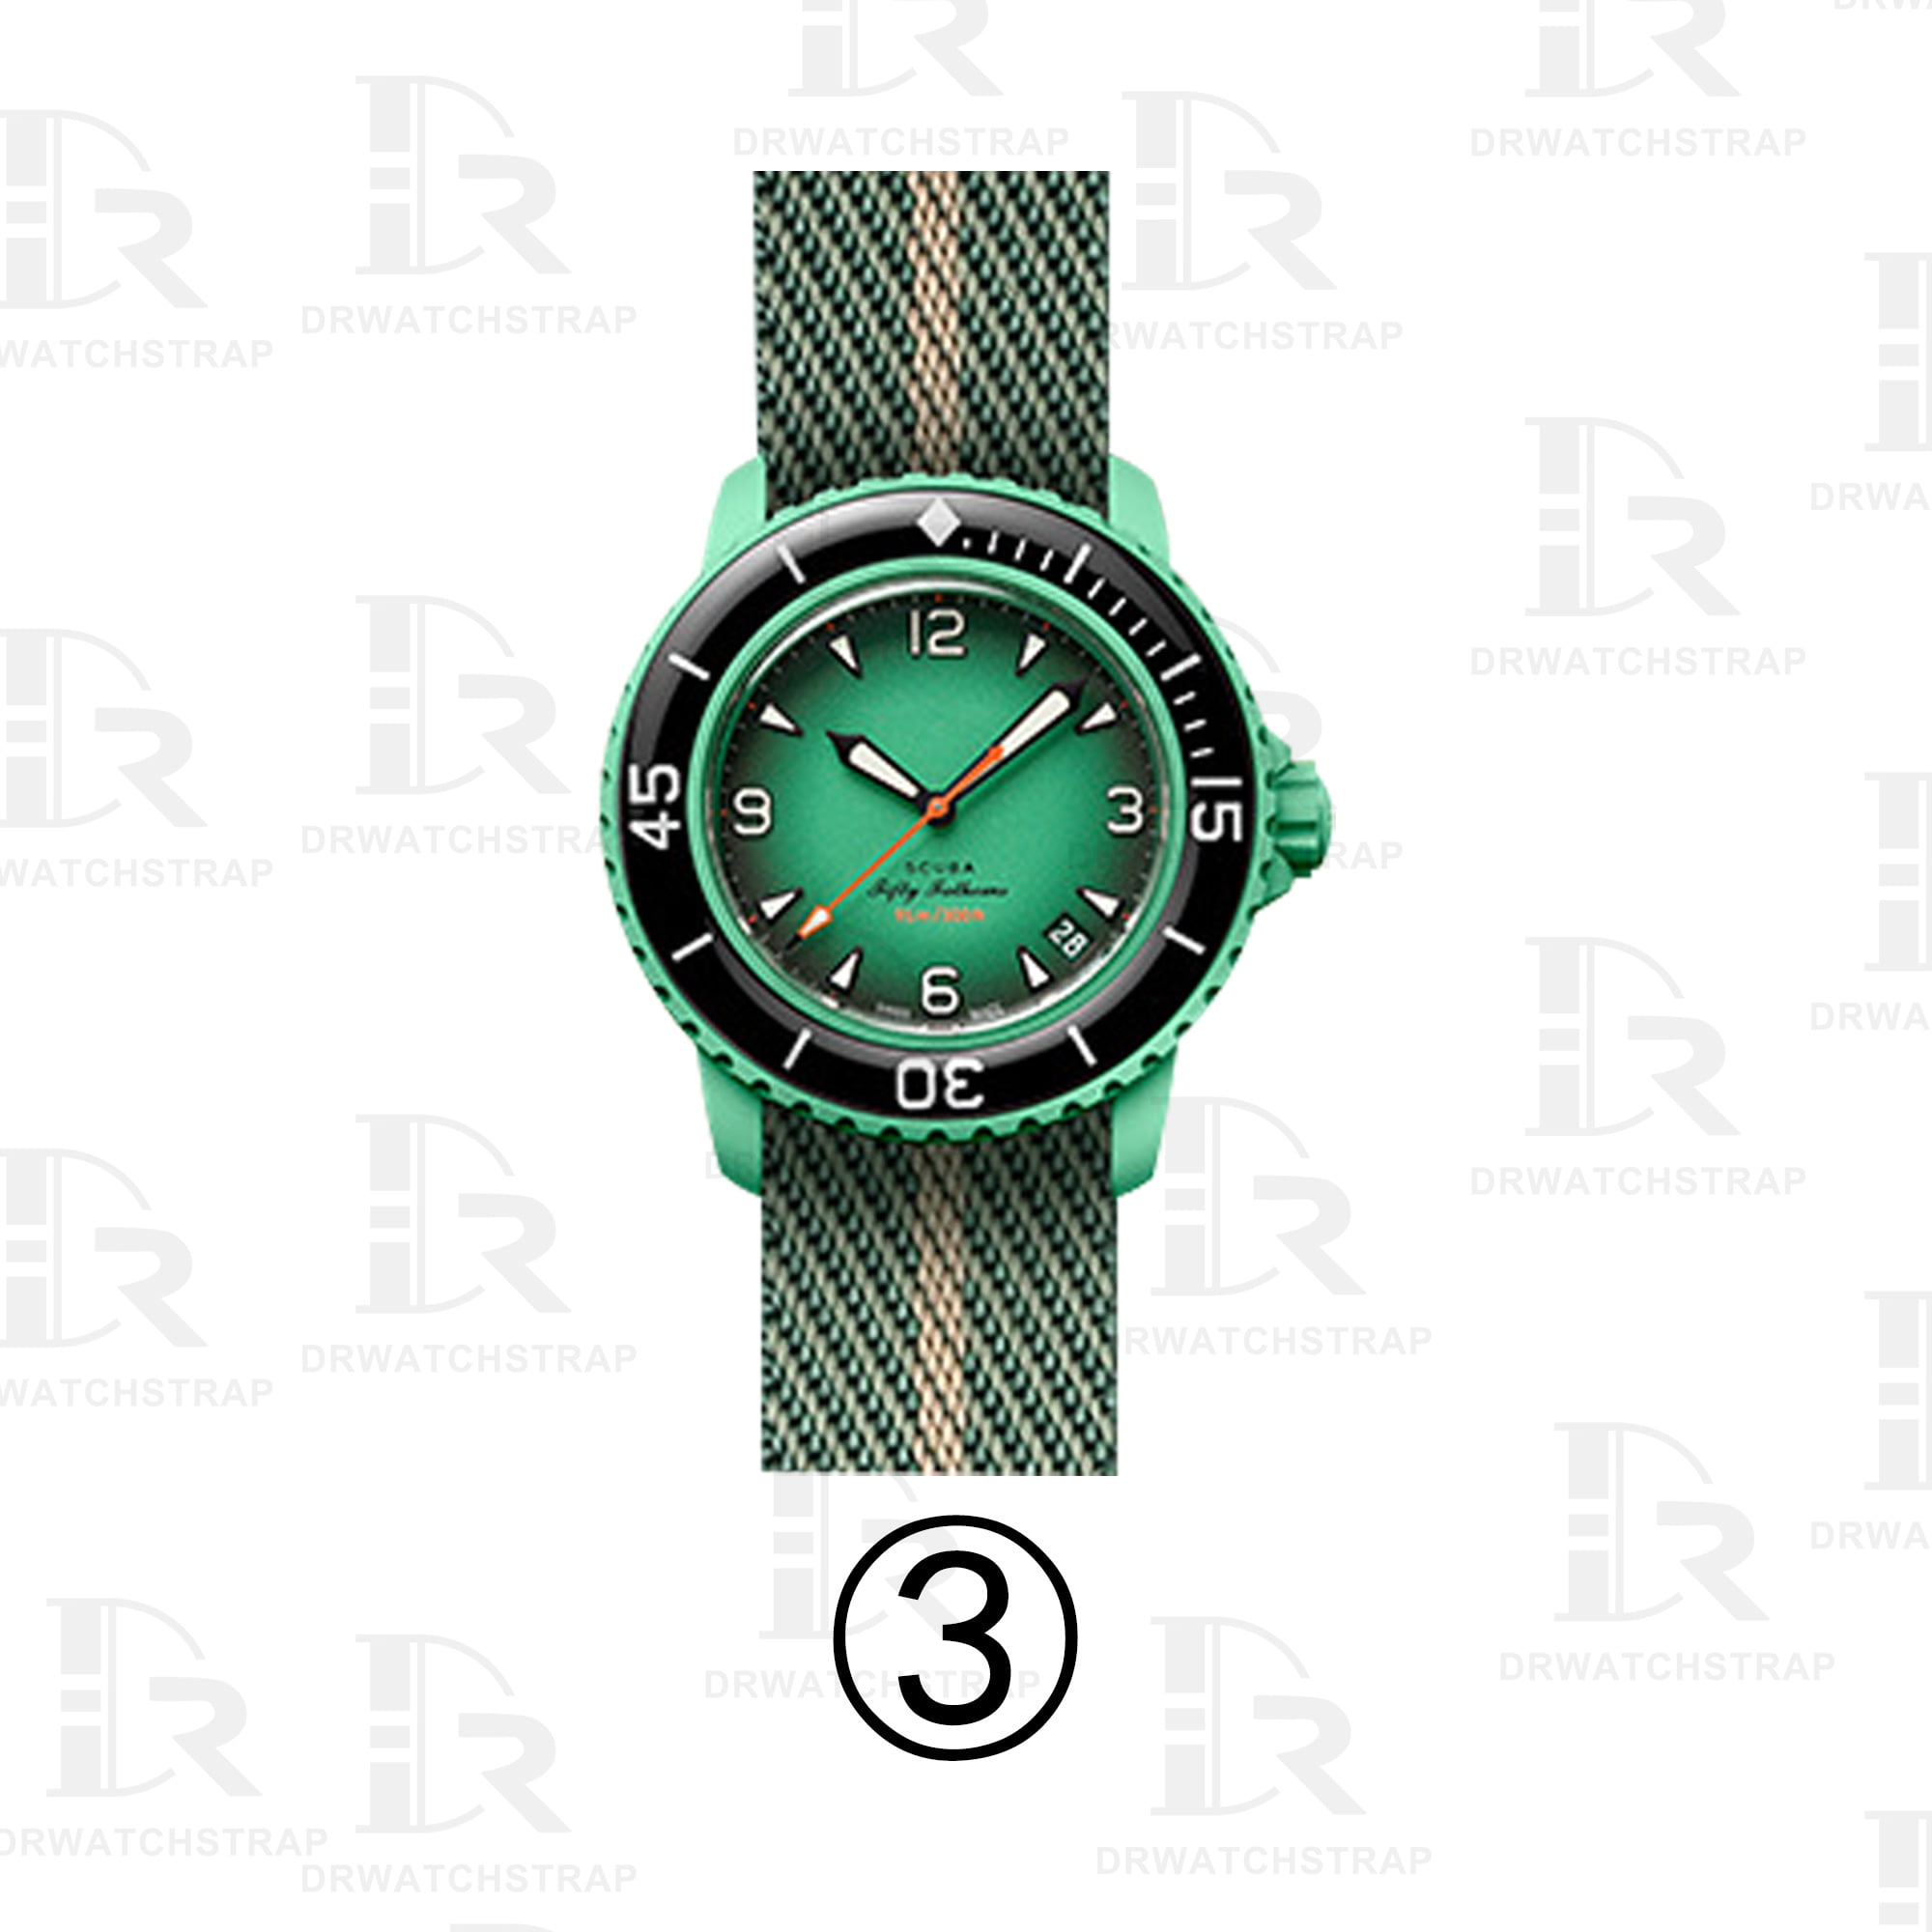 Buy Replacement Blancpain x Swatch watch bands green 20mm Blancpain nato strap